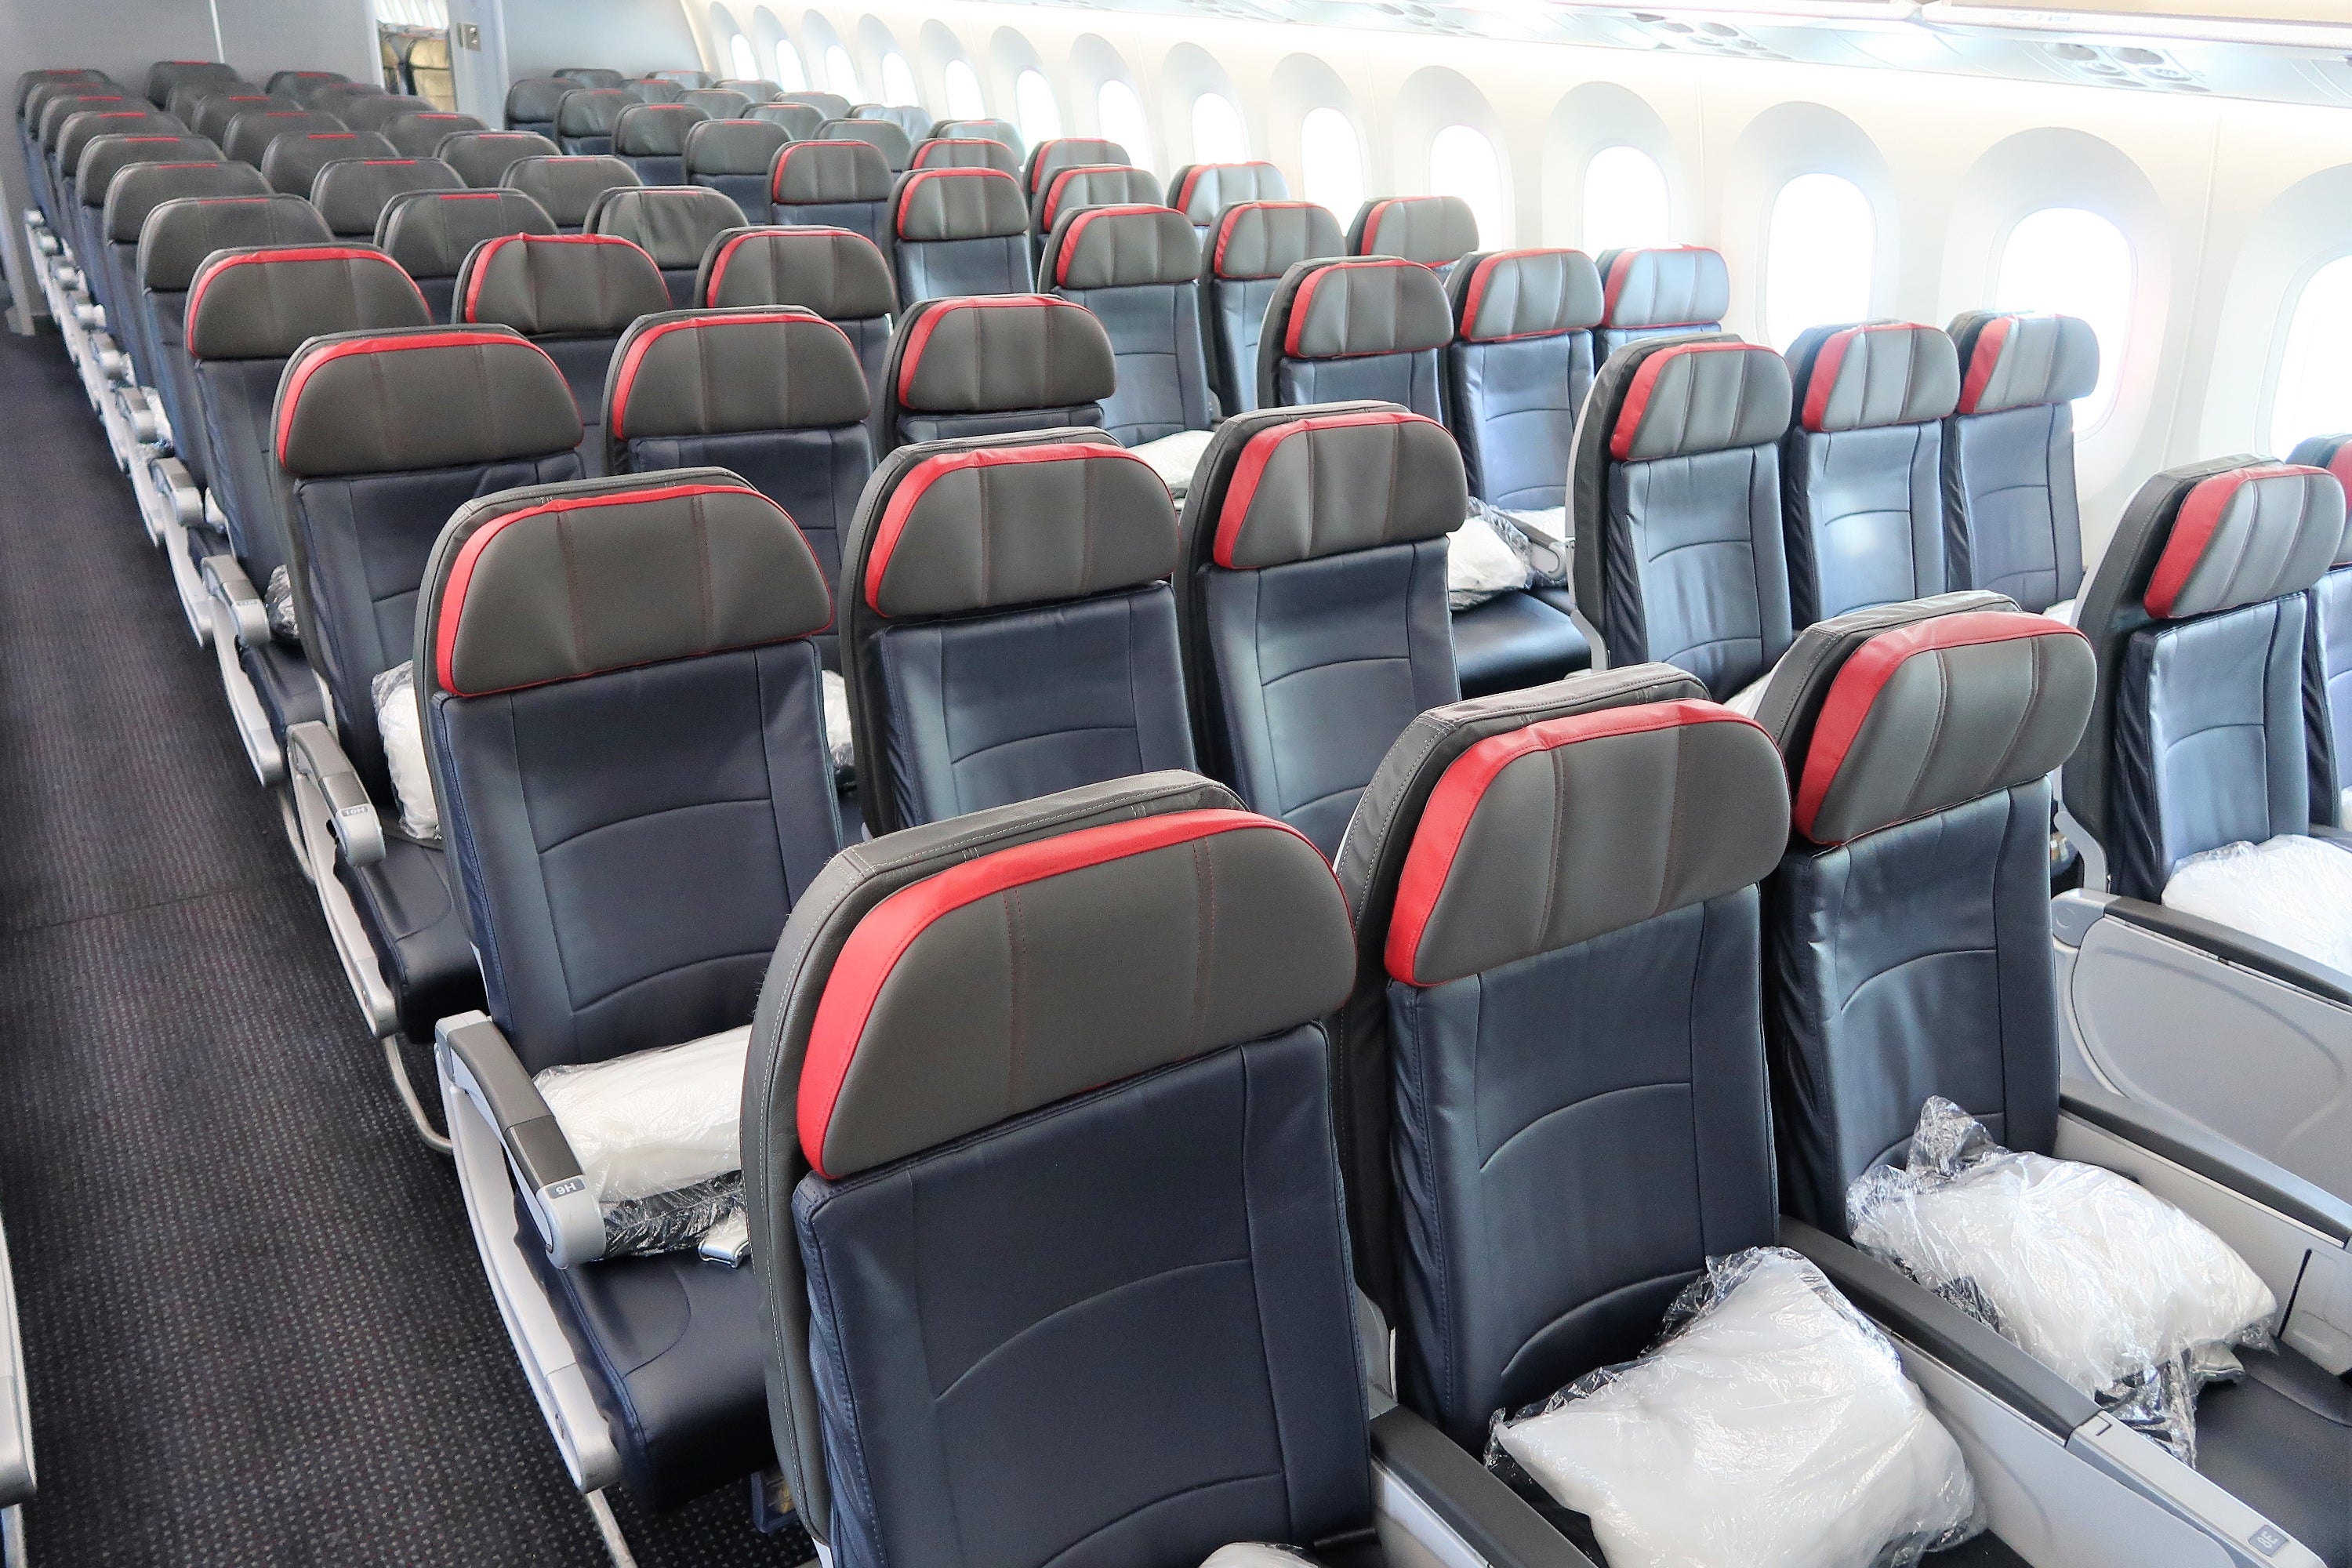 american airlines seat selection fee basic economy